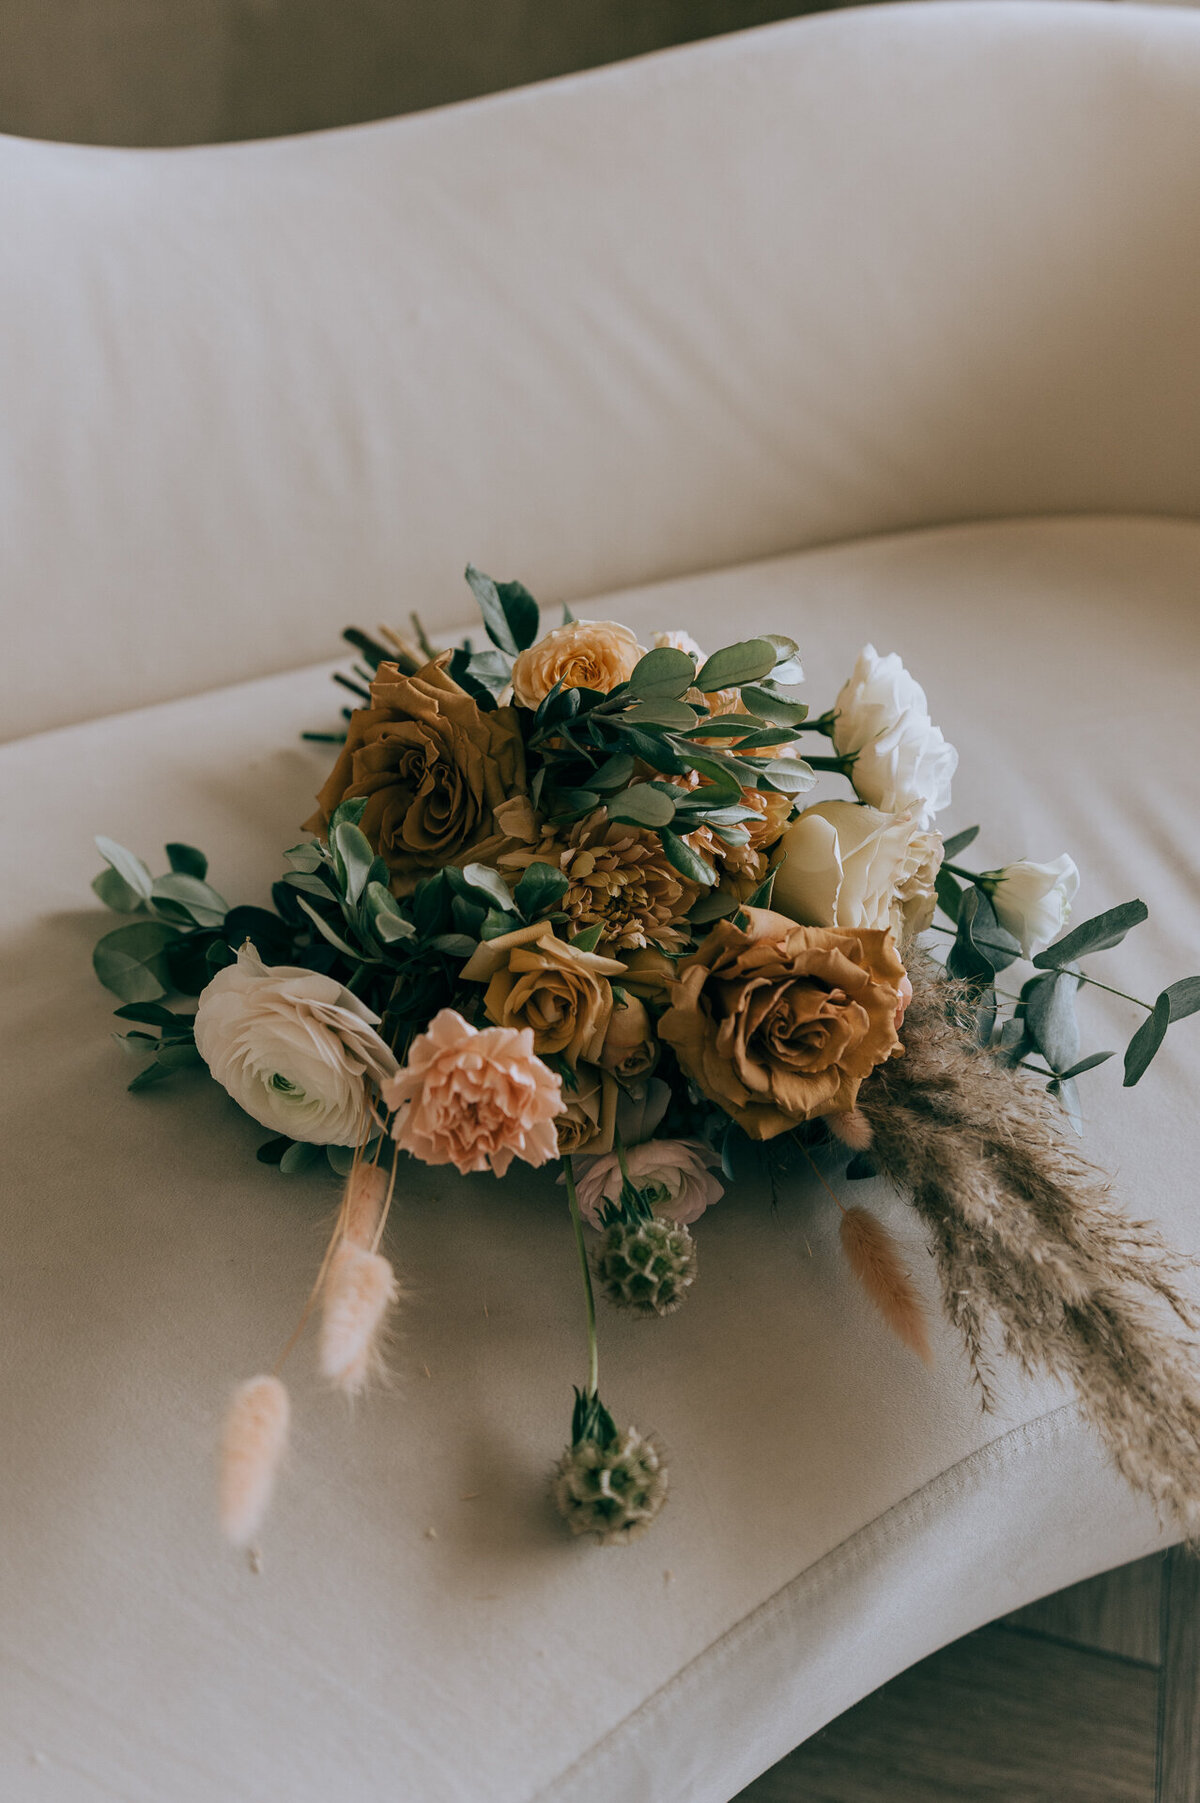 A bouquet of flowers with roses and greenery rests on a beige sofa.